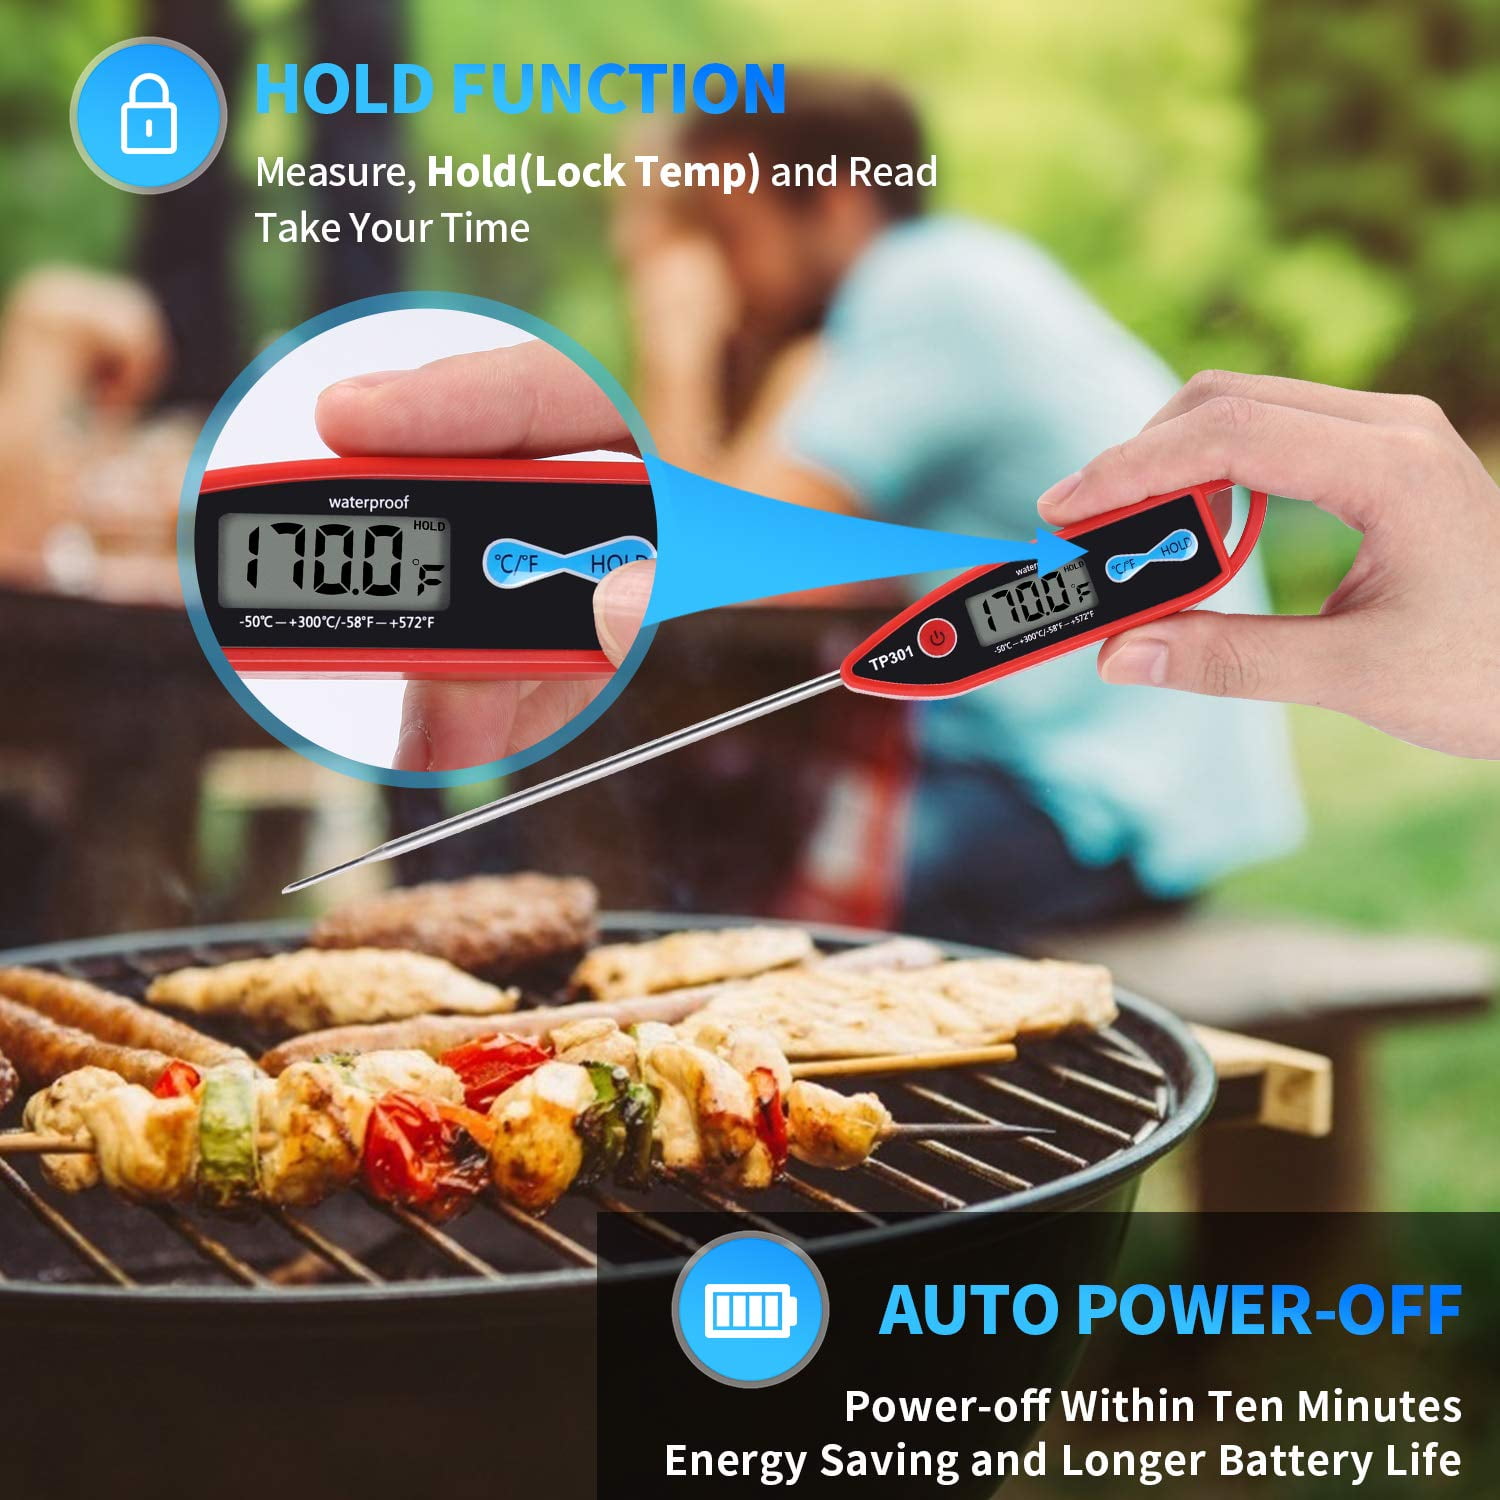 Happy Date Digital Water Thermometer for Liquid, Candle, Instant Read with Waterproof for Food, Meat, Milk, Long Probe1Pcs/2Pcs/3Pcs, Other